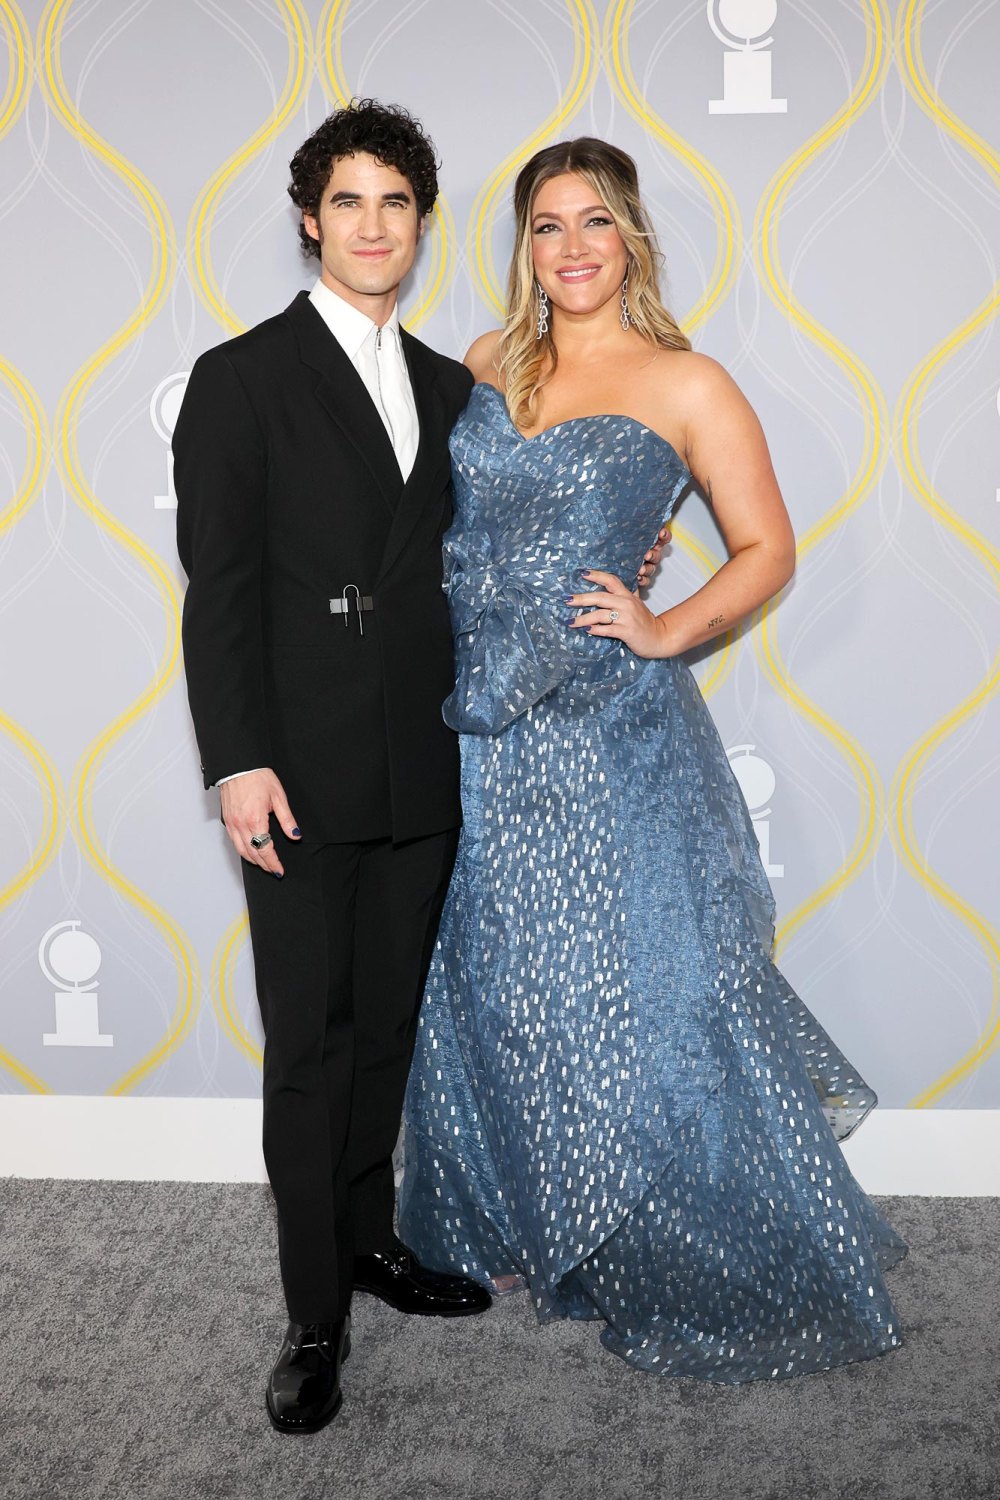 Darren Criss Wife Mia Criss Is Pregnant Expecting Baby No. 2 Details 541